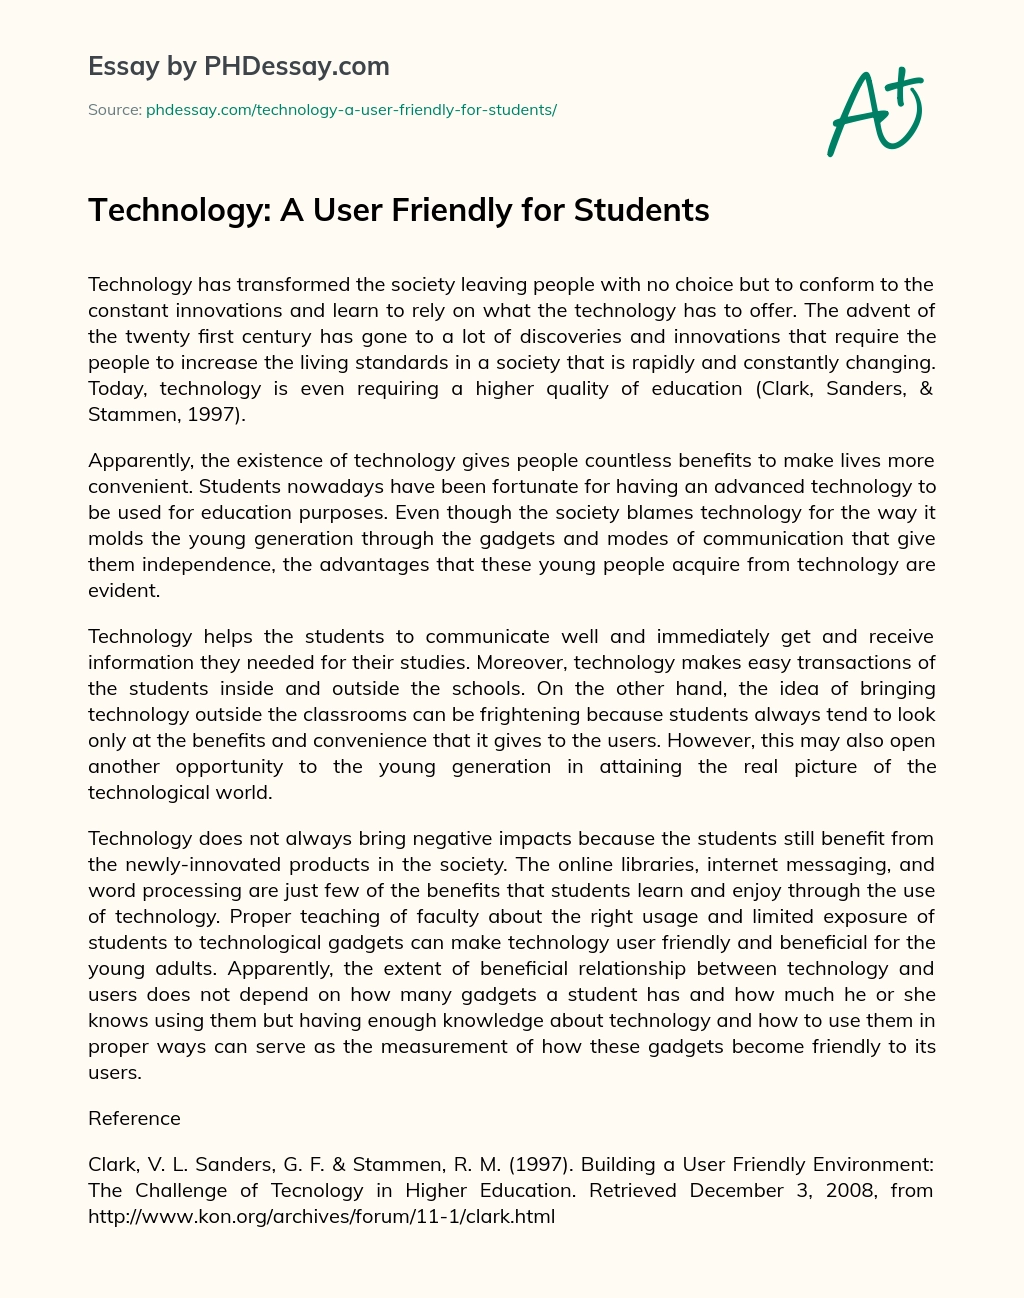 Technology: A User Friendly for Students essay